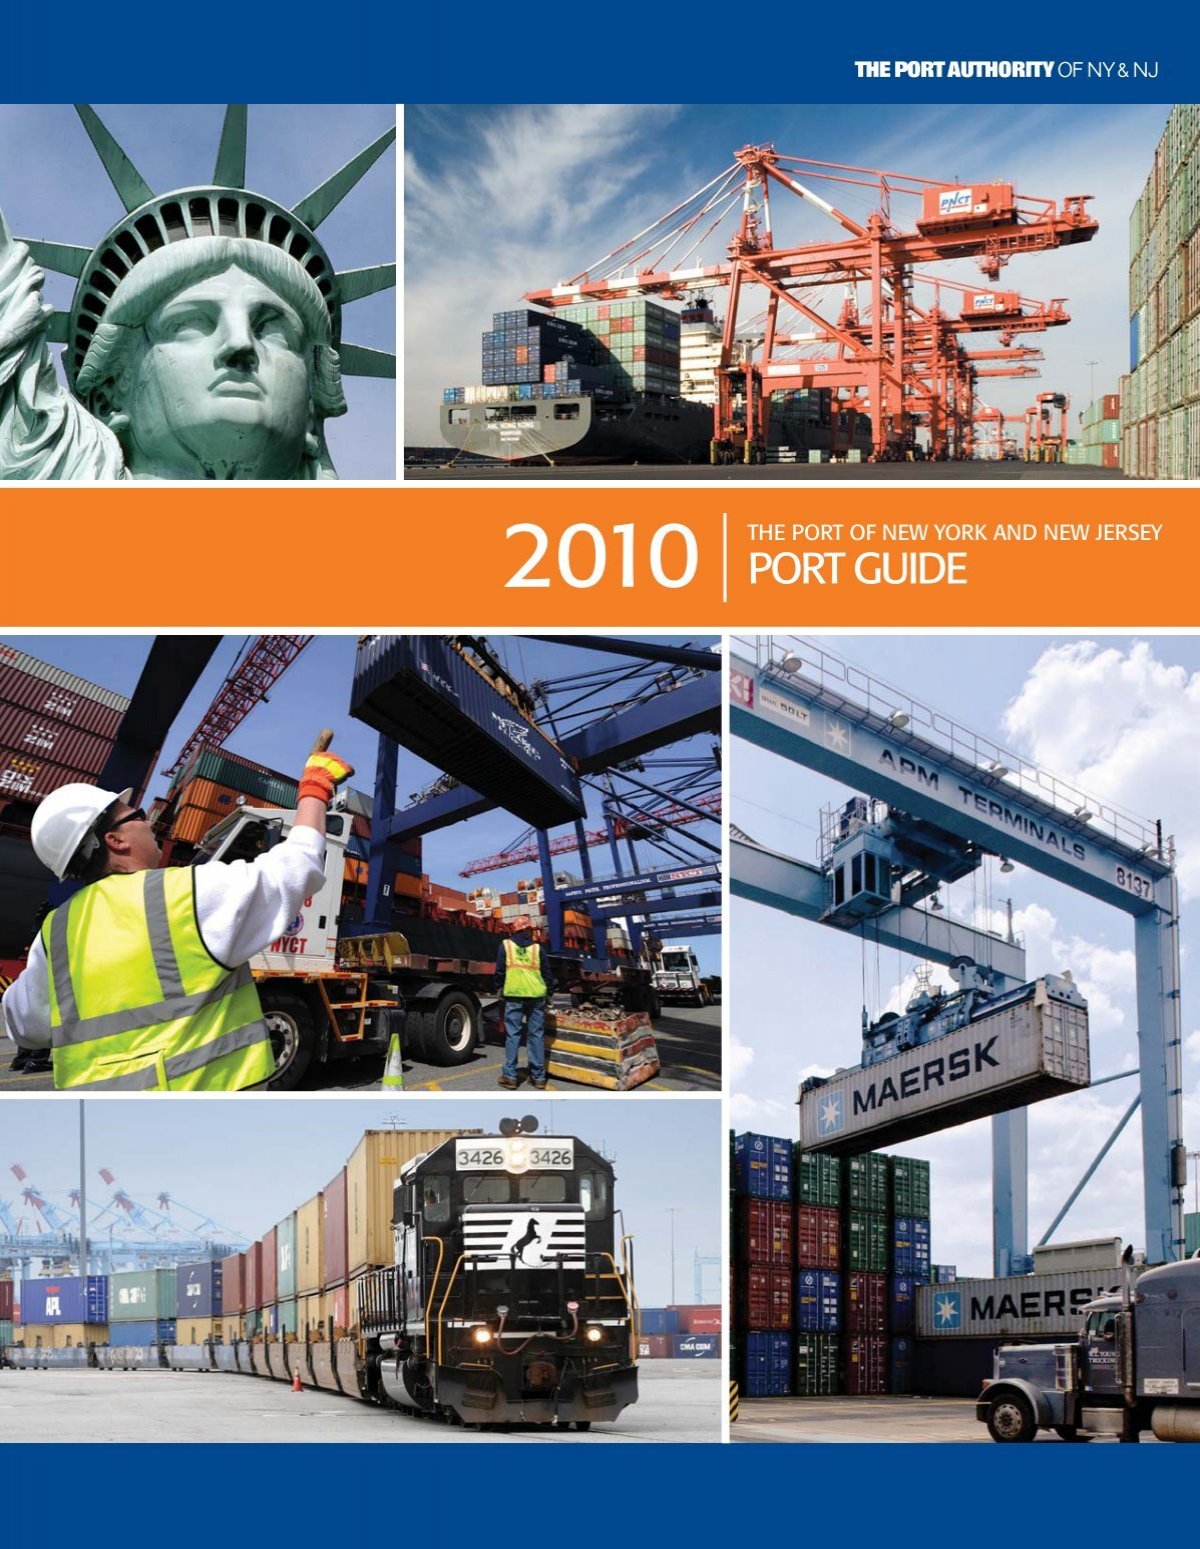 Panynj 10 Layout 1 Seaports Of The Americas